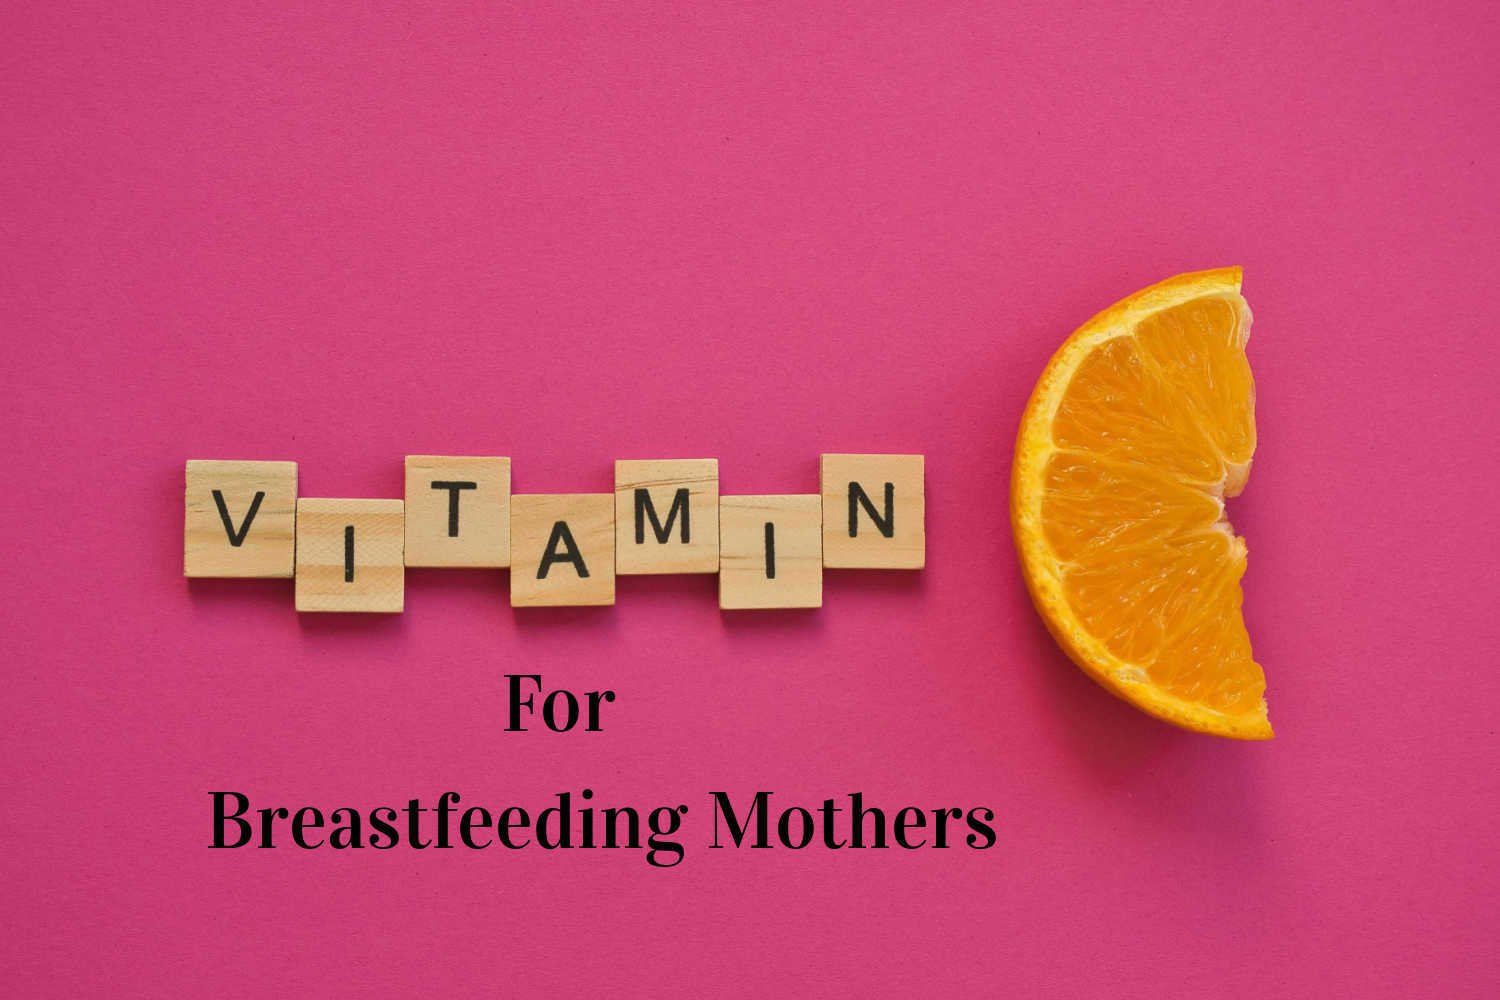 Vitamin C For Breastfeeding Mothers – Everything You Need to Know